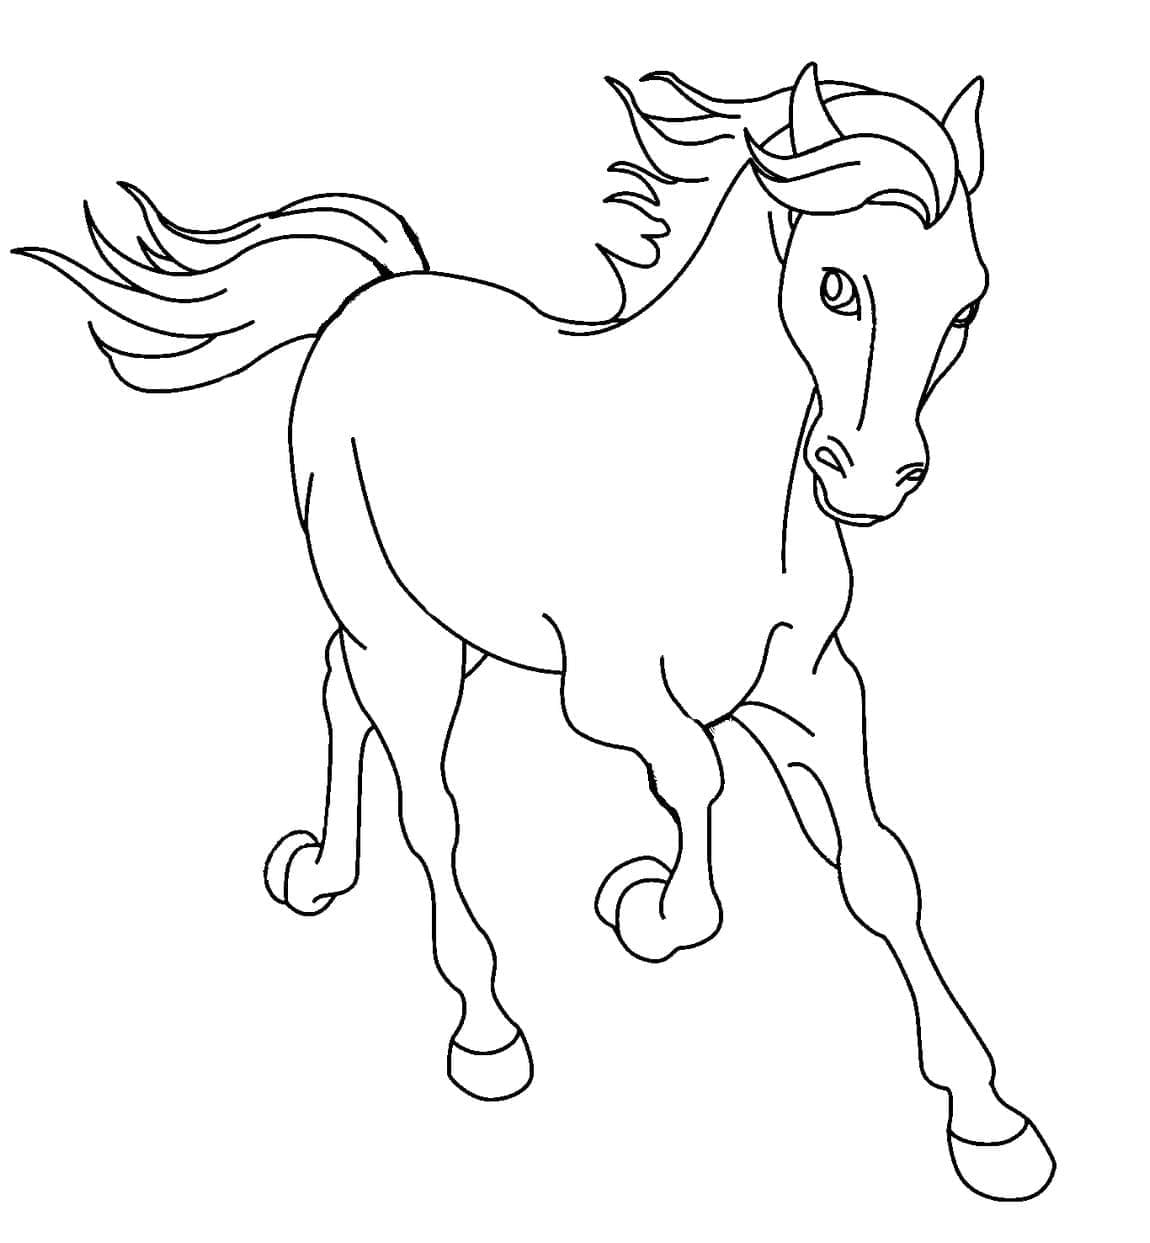 Cheval 9 coloring page